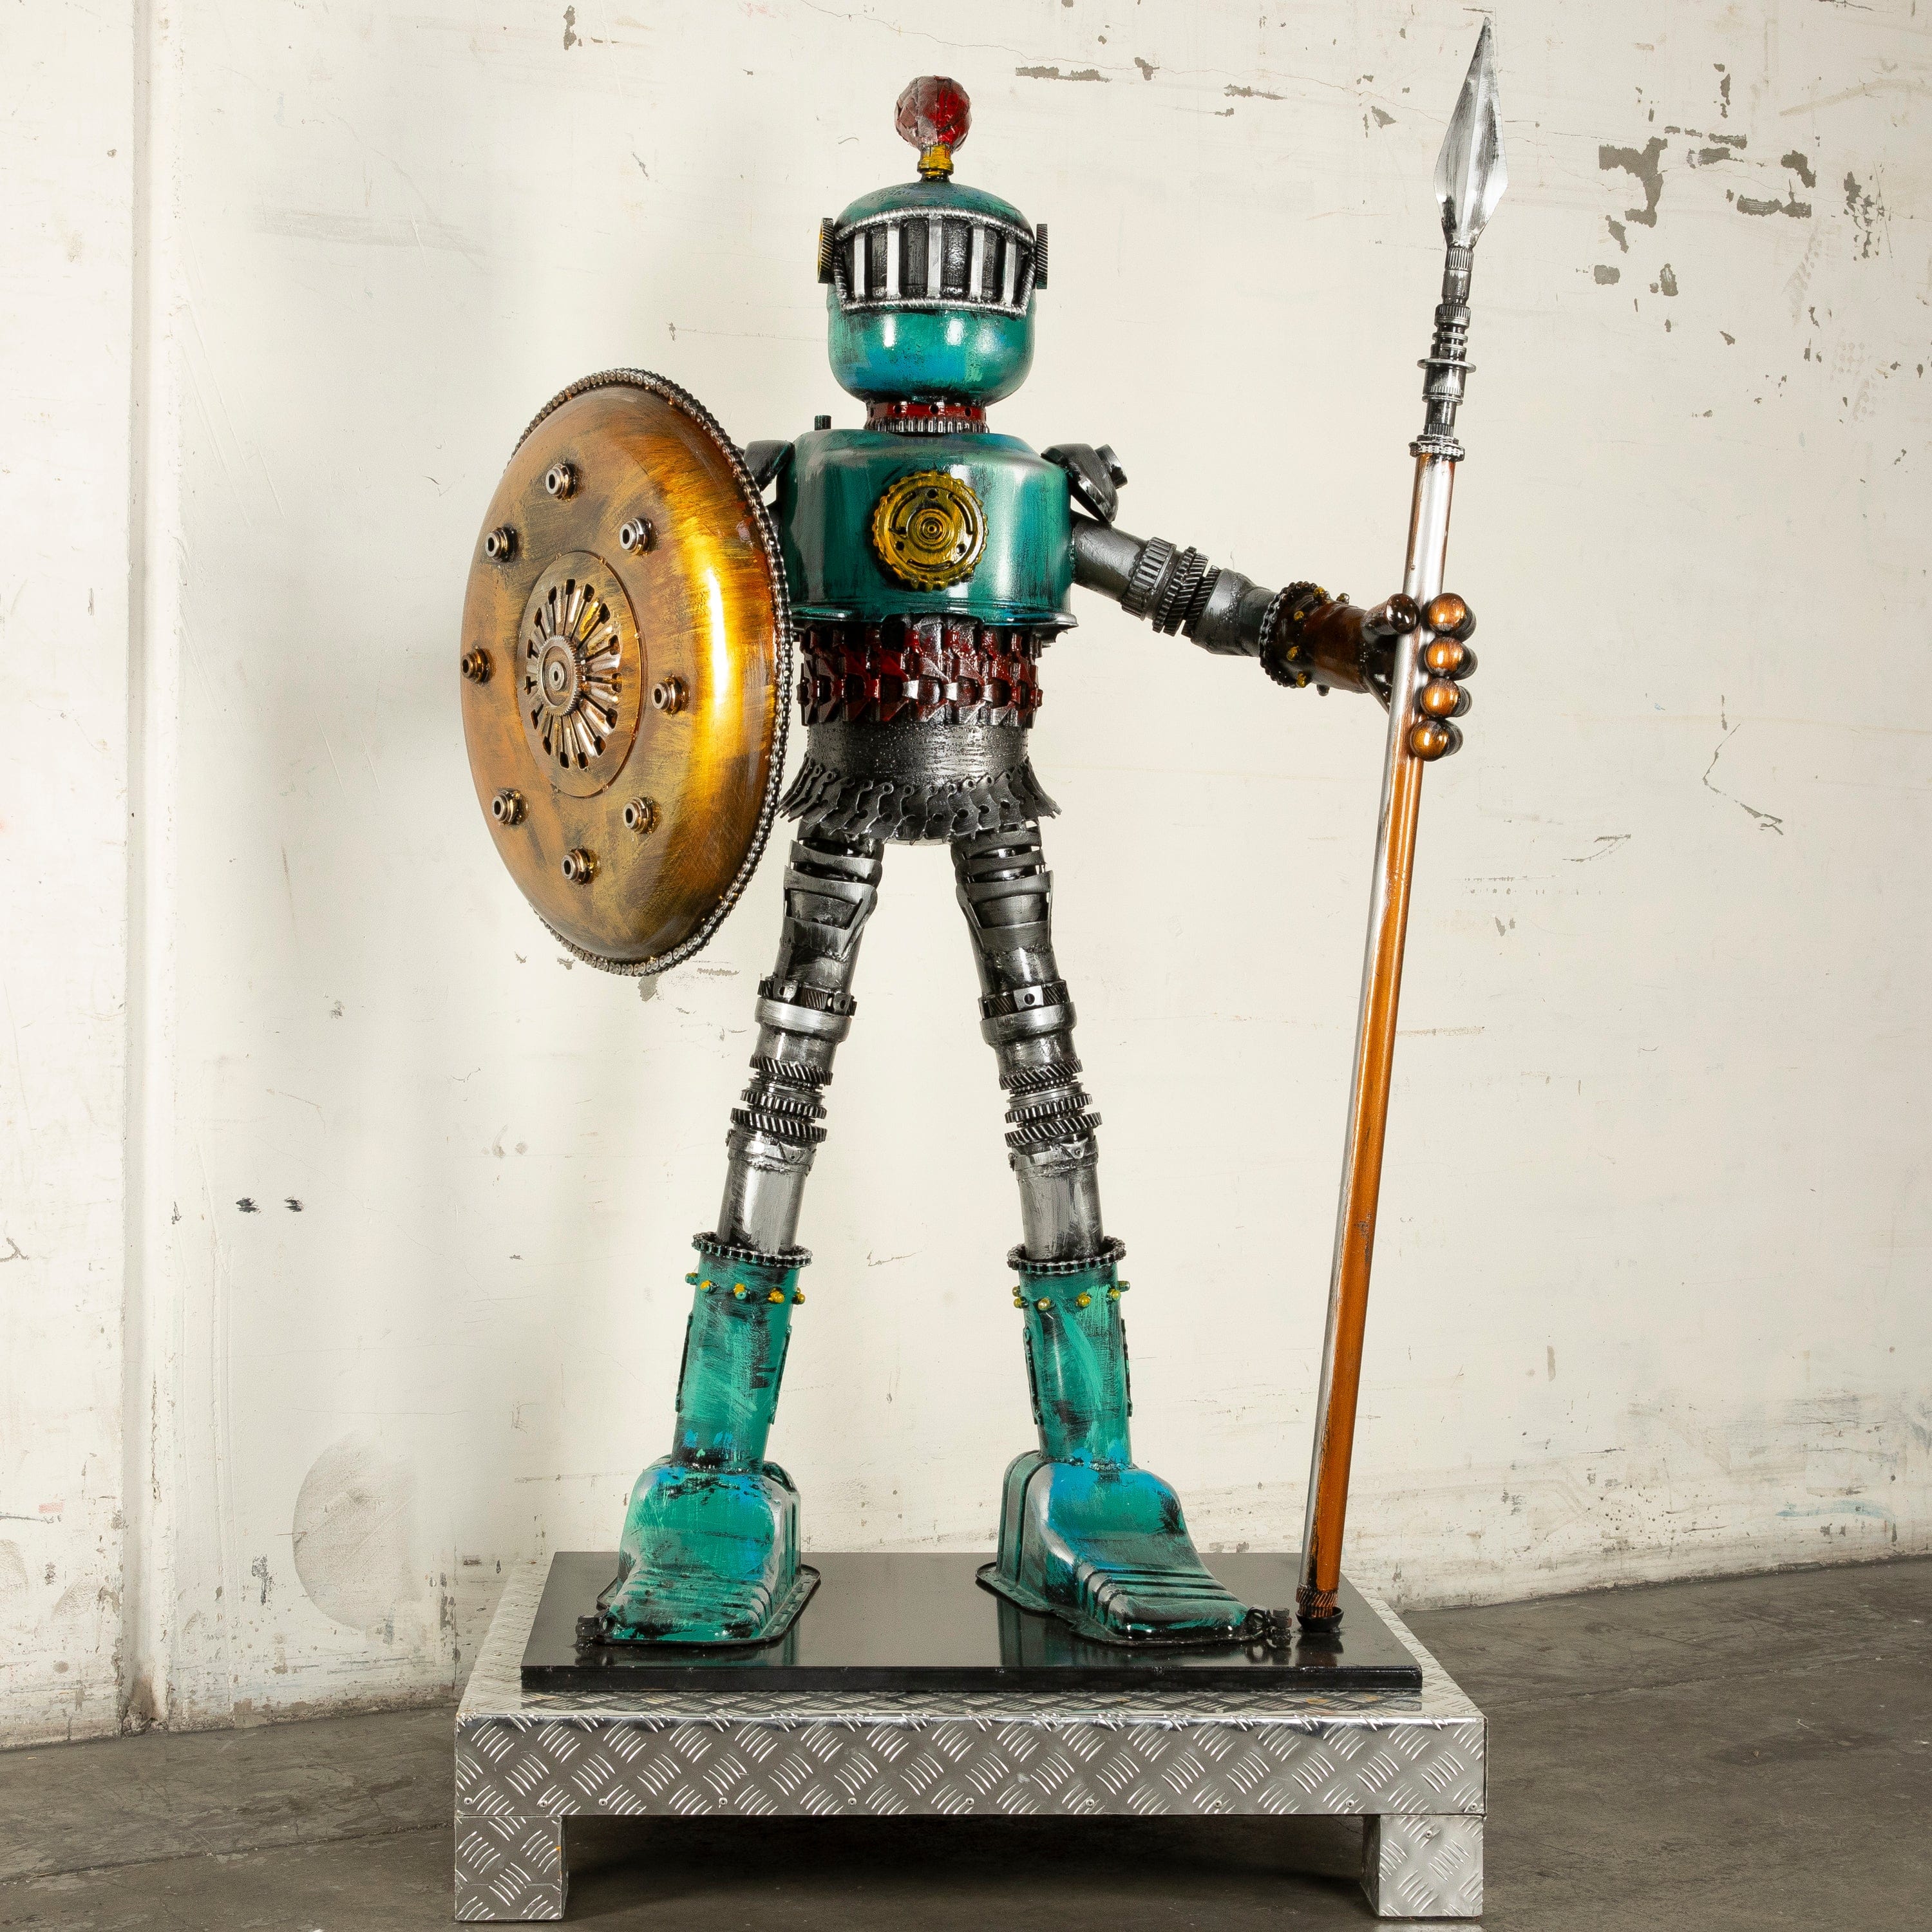 KALIFANO Recycled Metal Art 67" Knight Inspired Recycled Metal Art Sculpture RMS-KNROB170-N